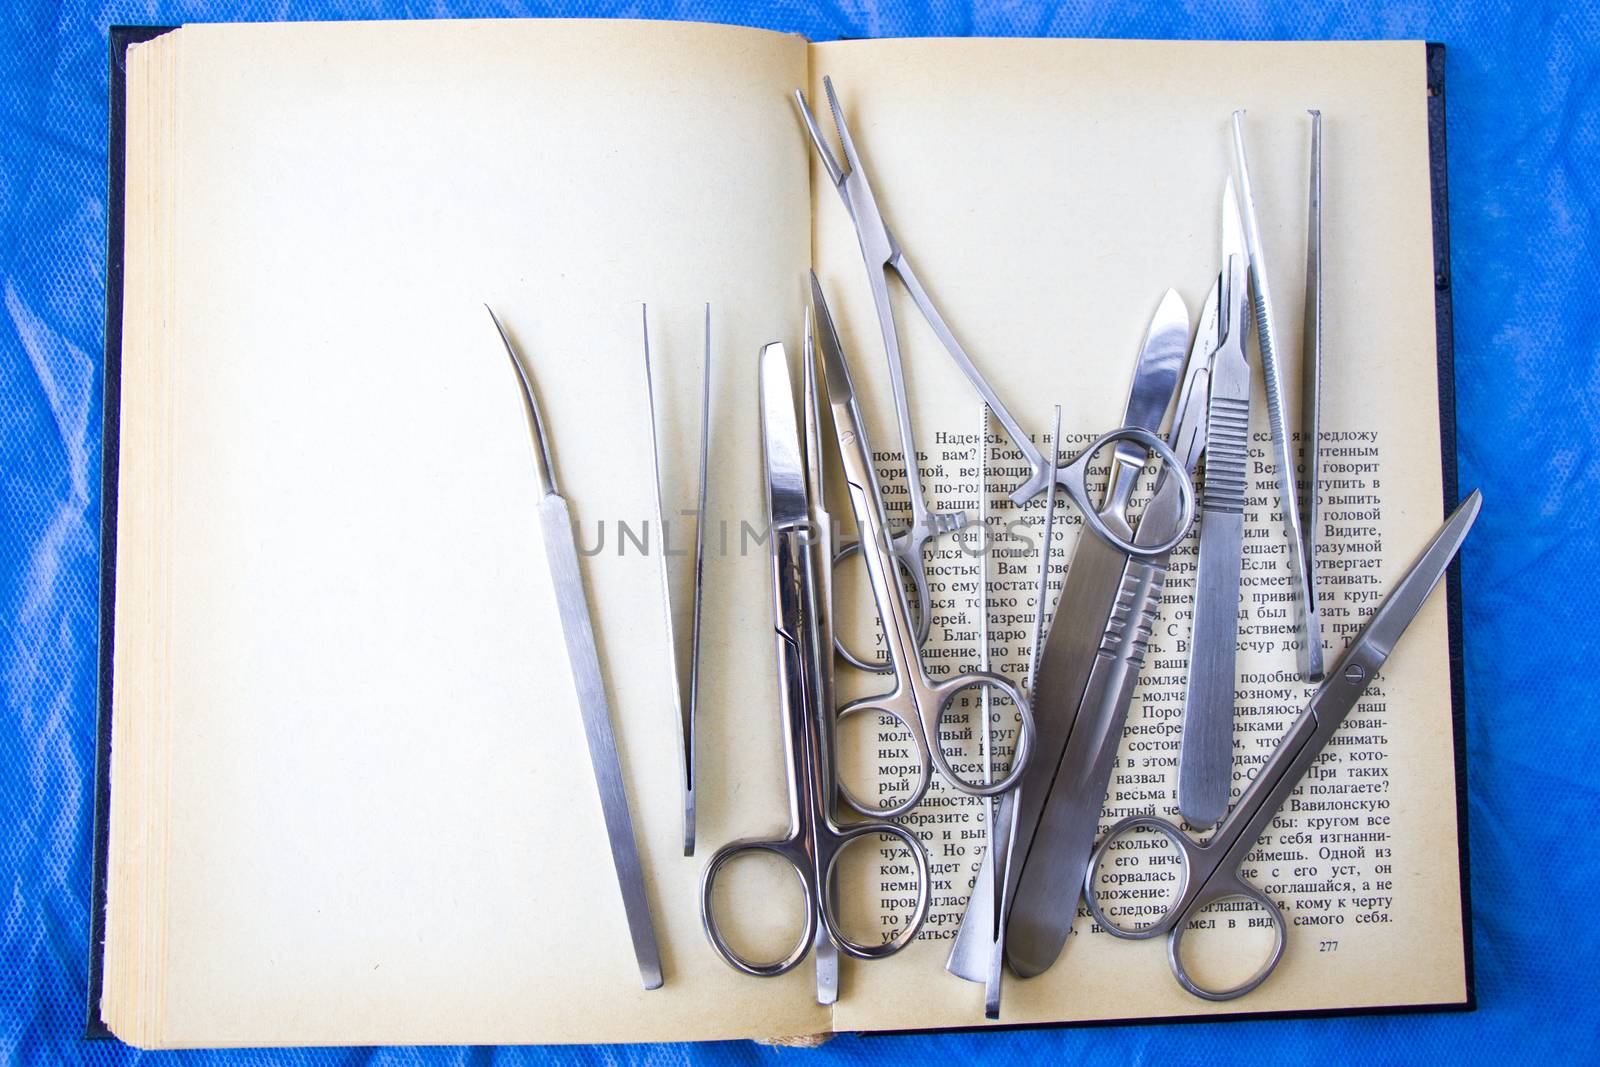 Dissection Kit - Stainless Steel Tools for Medical Students of Anatomy, Biology, Veterinary, Marine Biology and learning book